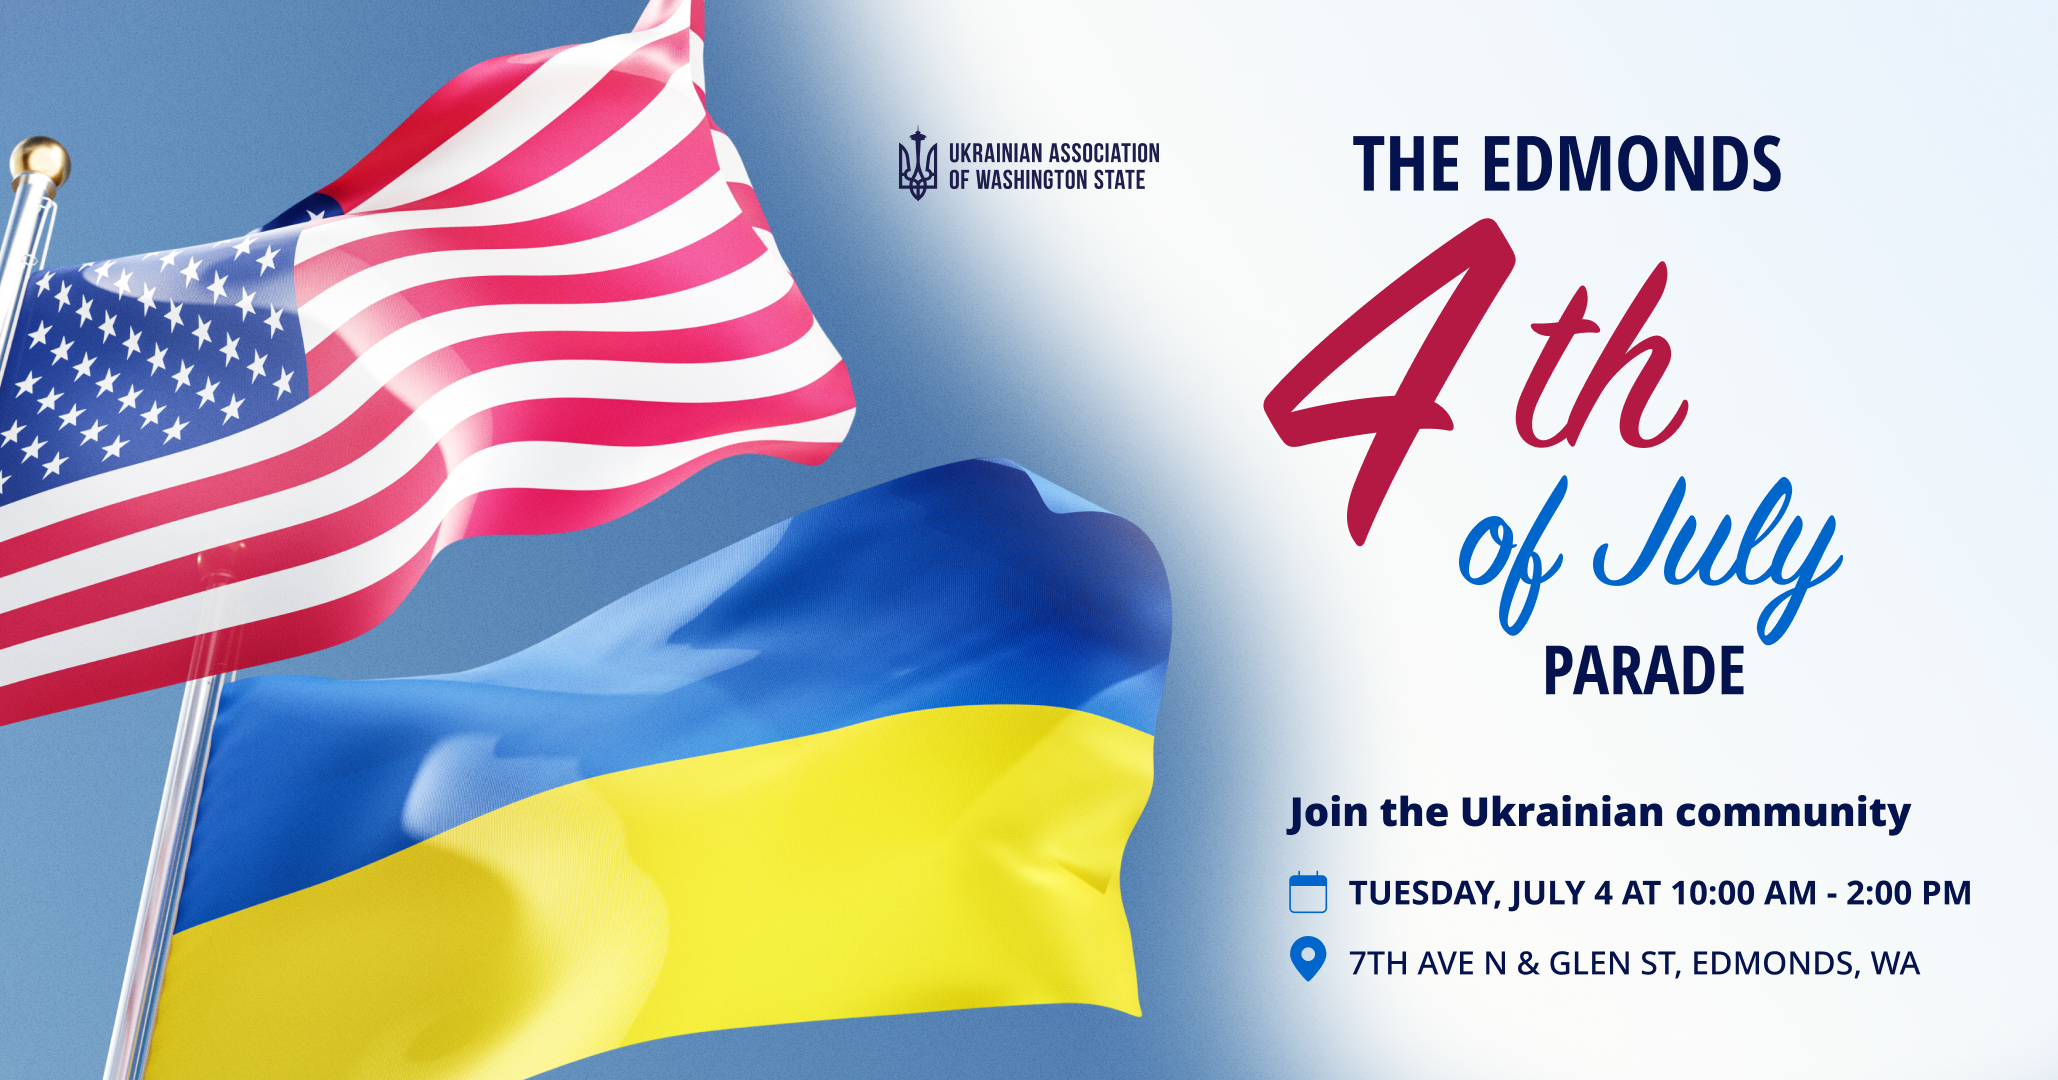 We invite you to join the Ukrainian Association of Washington State in celebrating Independence Day of the United States on the 4th of July in Edmonds.